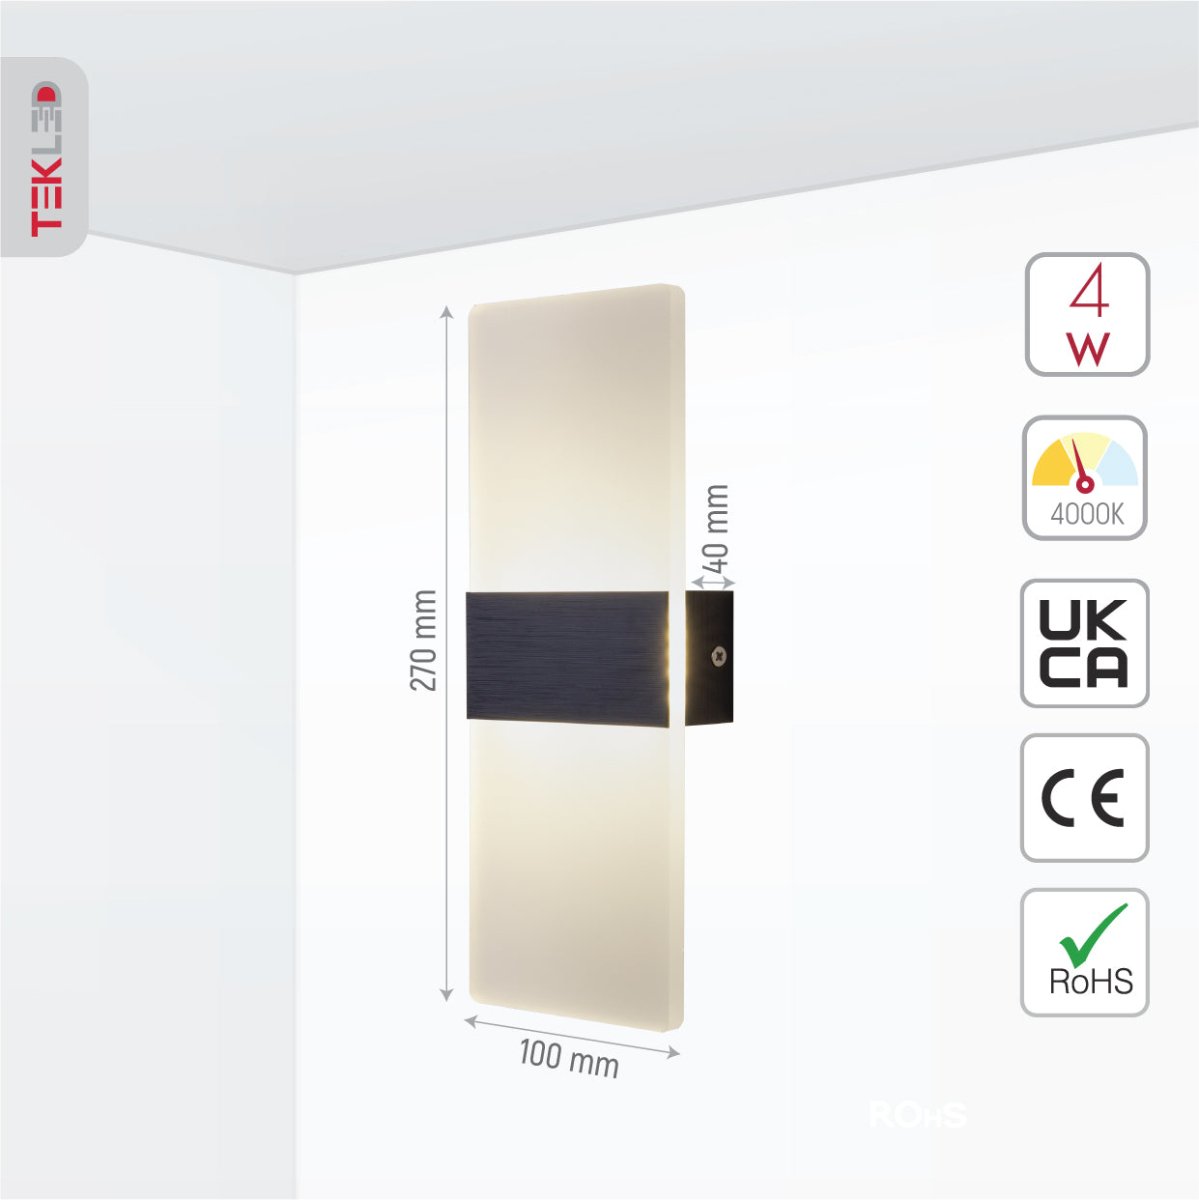 Size and specs of LED Dark Wood Metal Acrylic Wall Light 4W Cool White 4000K | TEKLED 151-19622